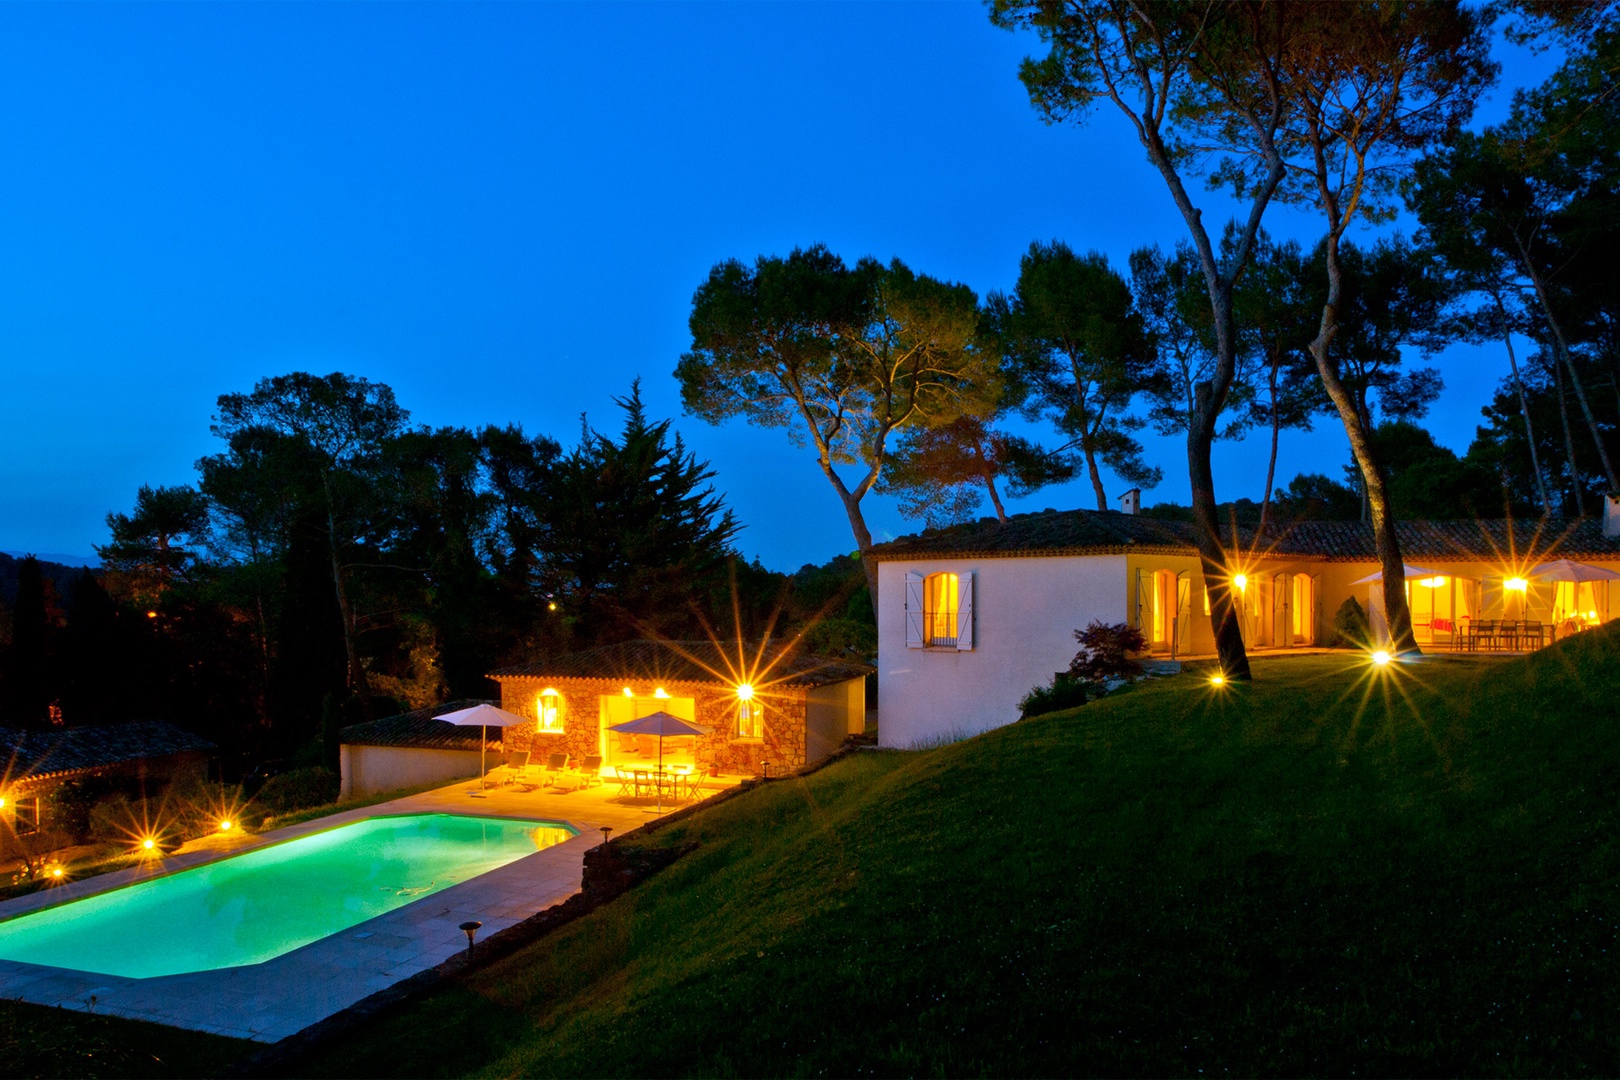 Spend relaxing evenings in this stunning villa